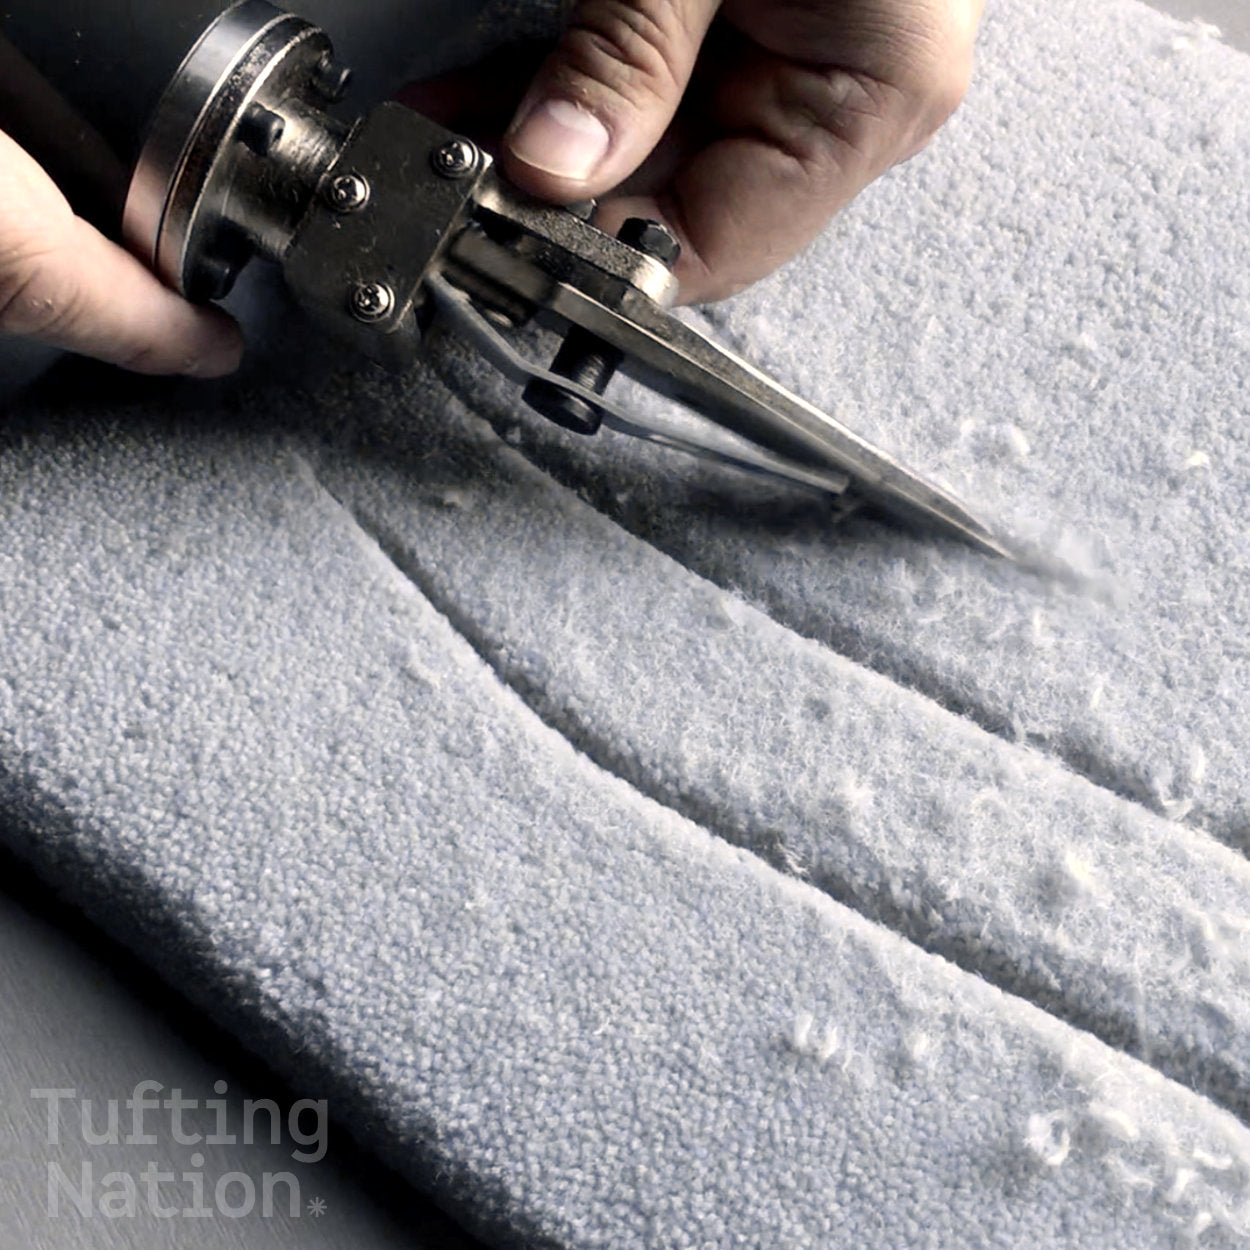 Electric Rug Carving Scissors in action, sculpting lines into a tufted rug made of wool rug yarn